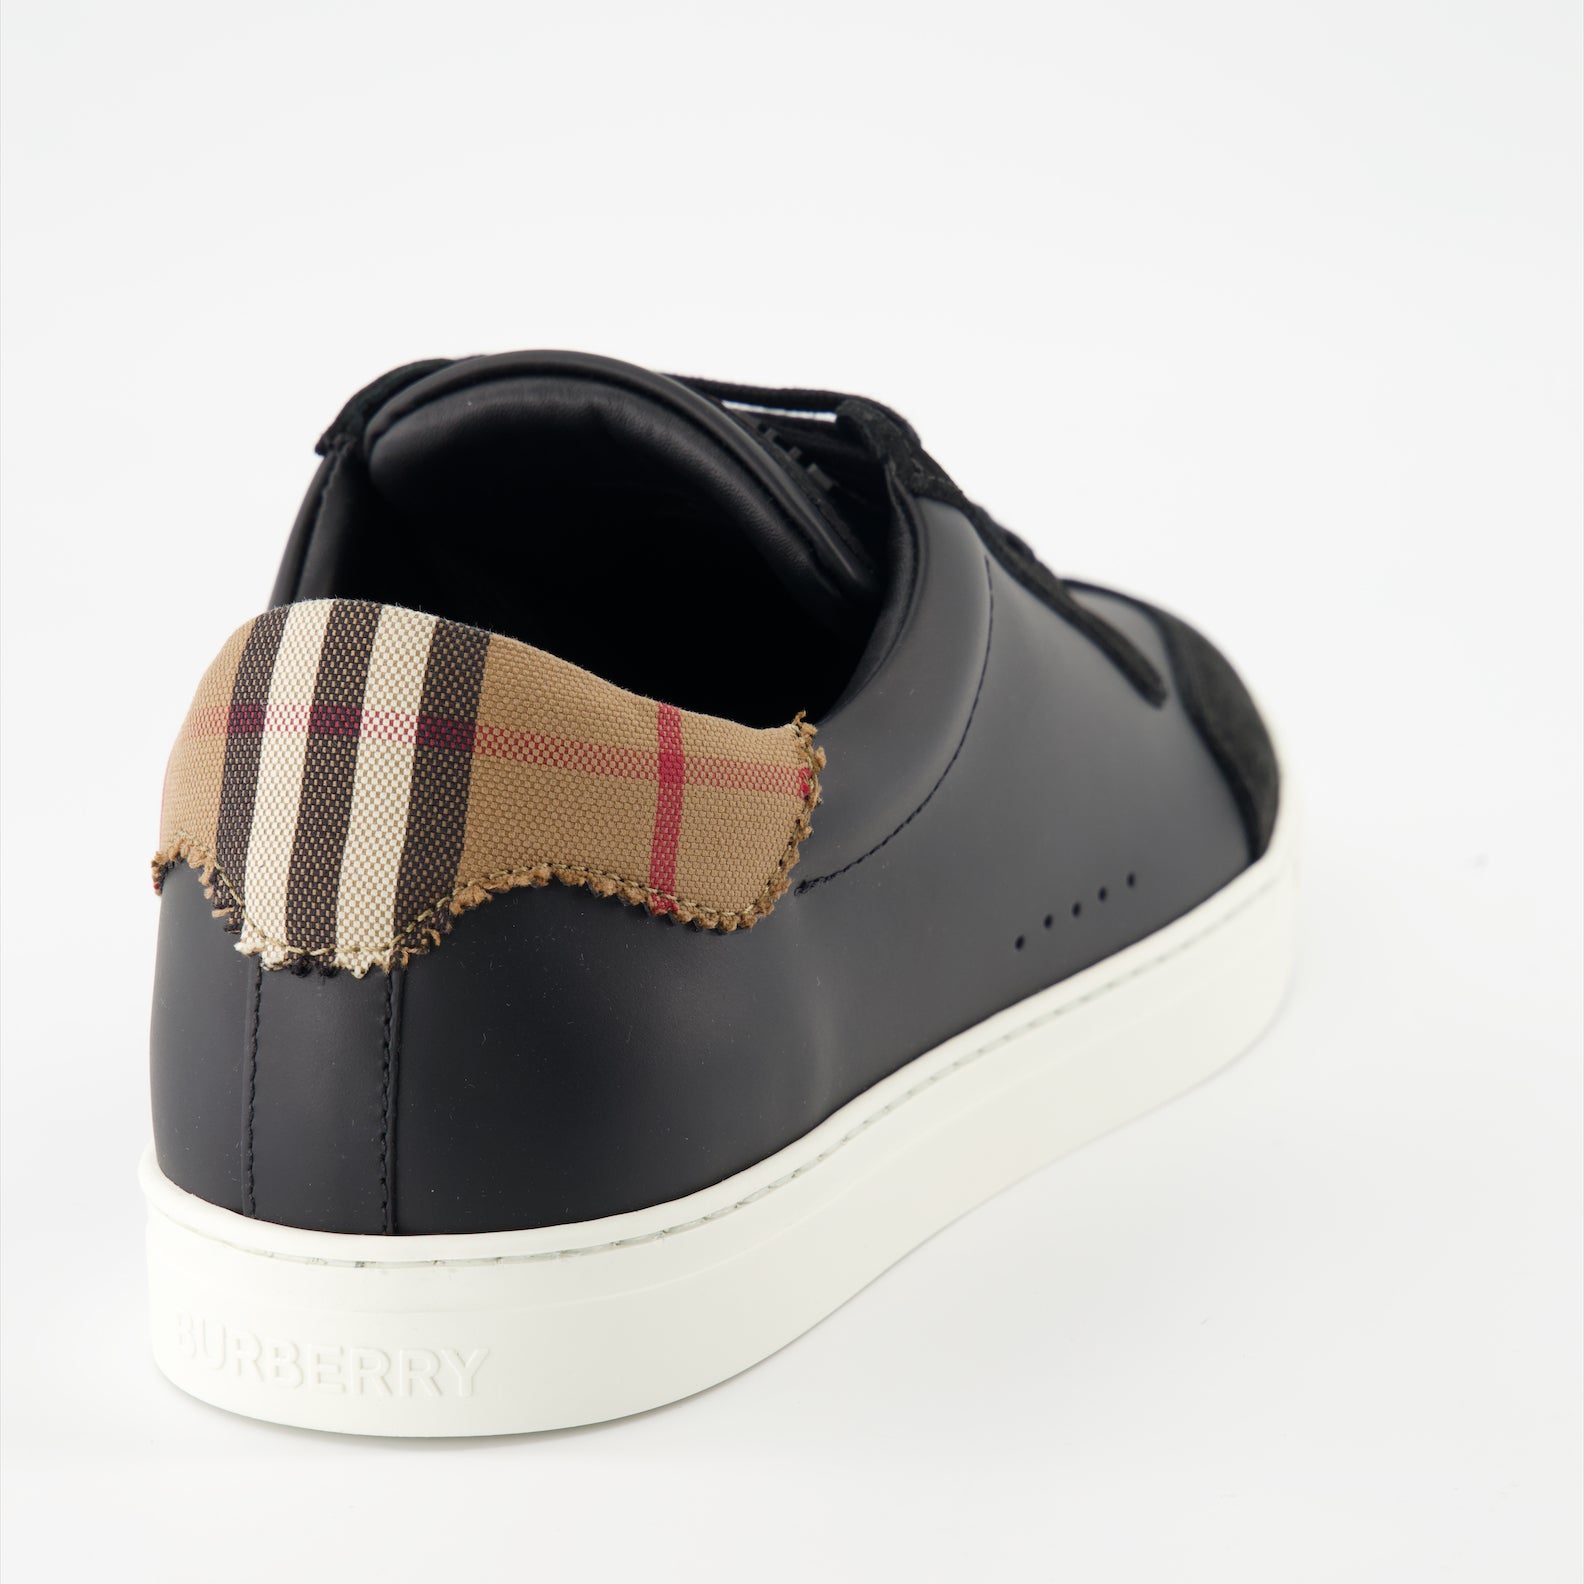 Checked leather and suede sneakers